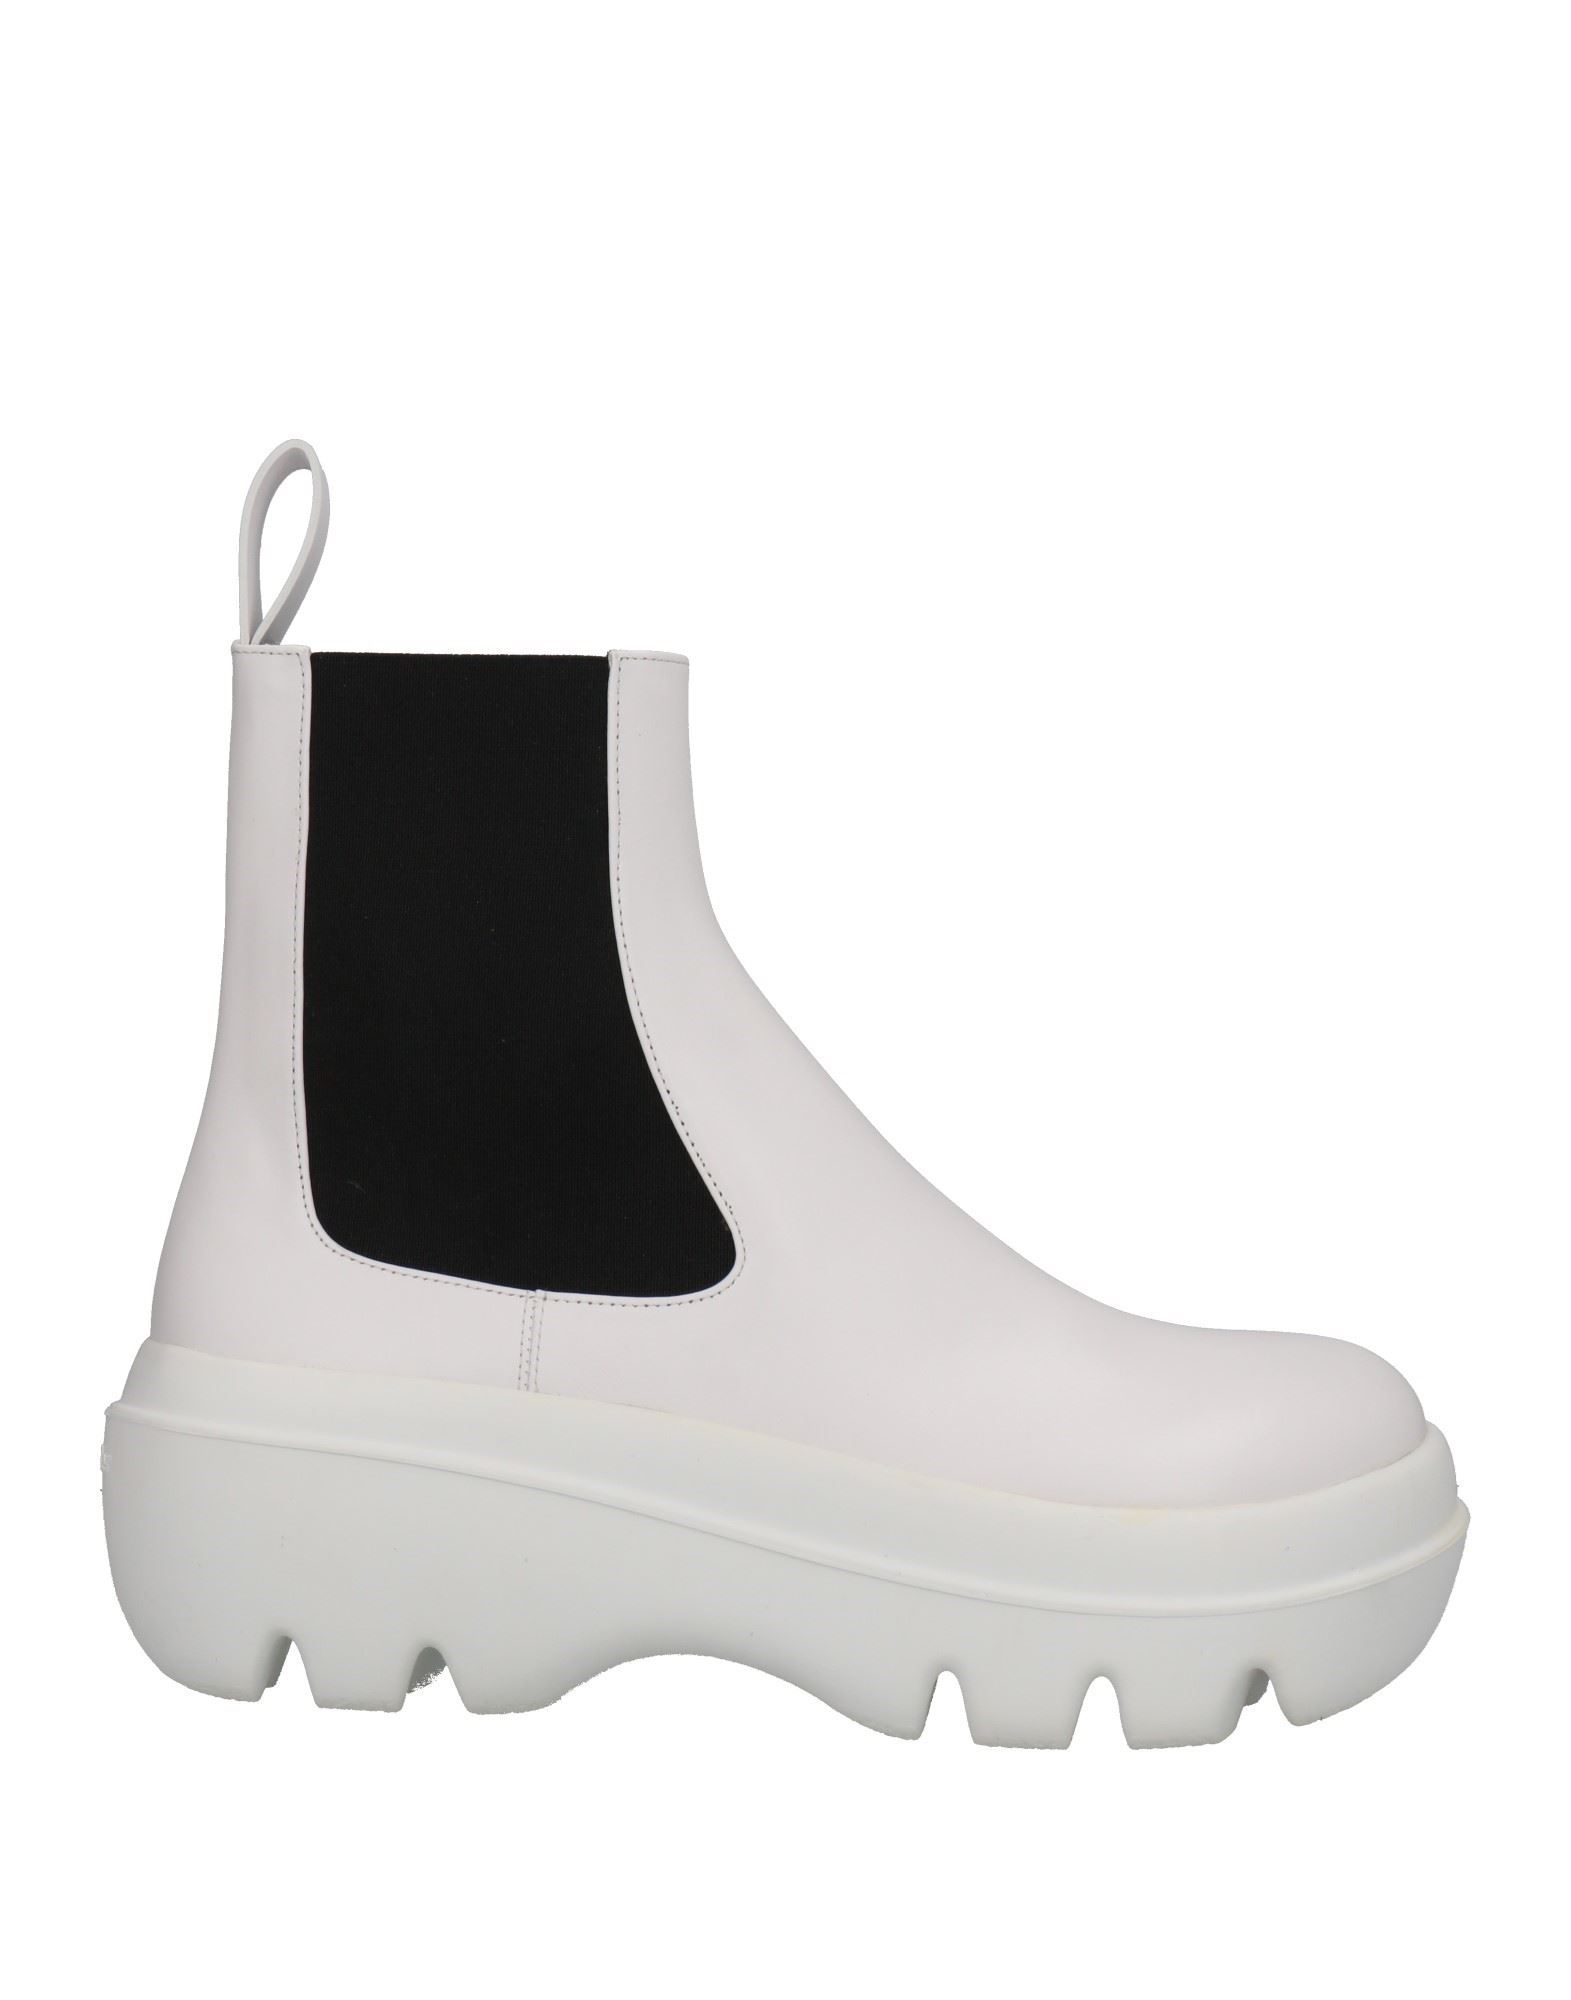 Proenza Schouler Ankle Boots In White